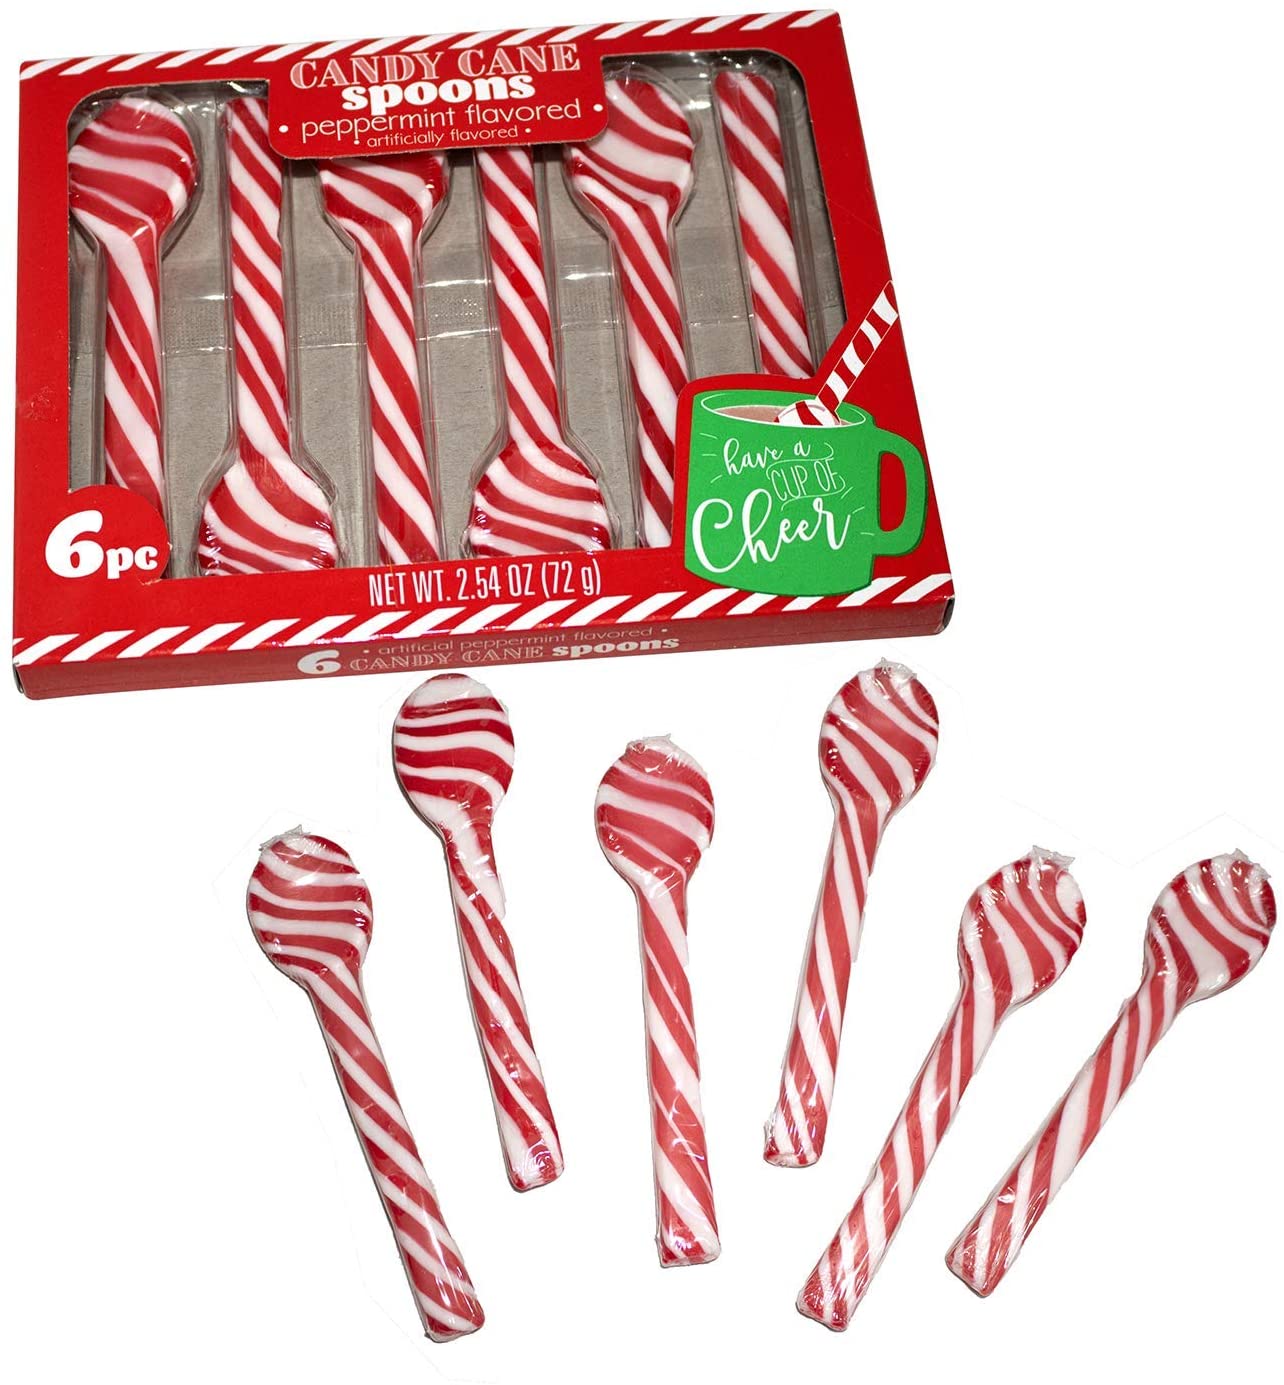 Candy cane spoons.